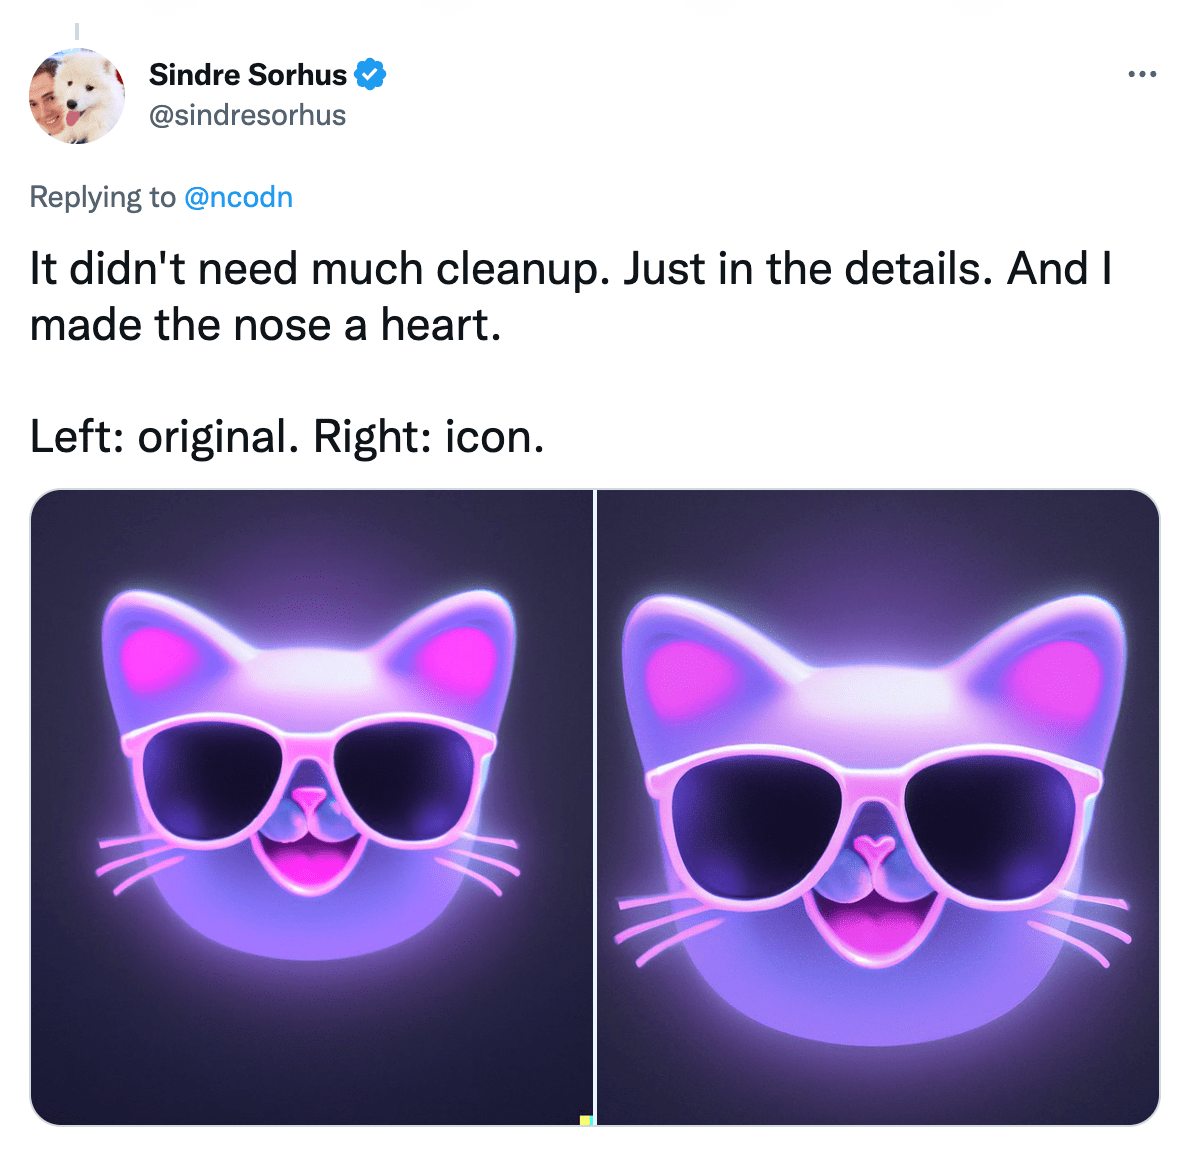 Screenshot of a tweet from @sindresorhus showing a glowing cat app icon he made with AI.